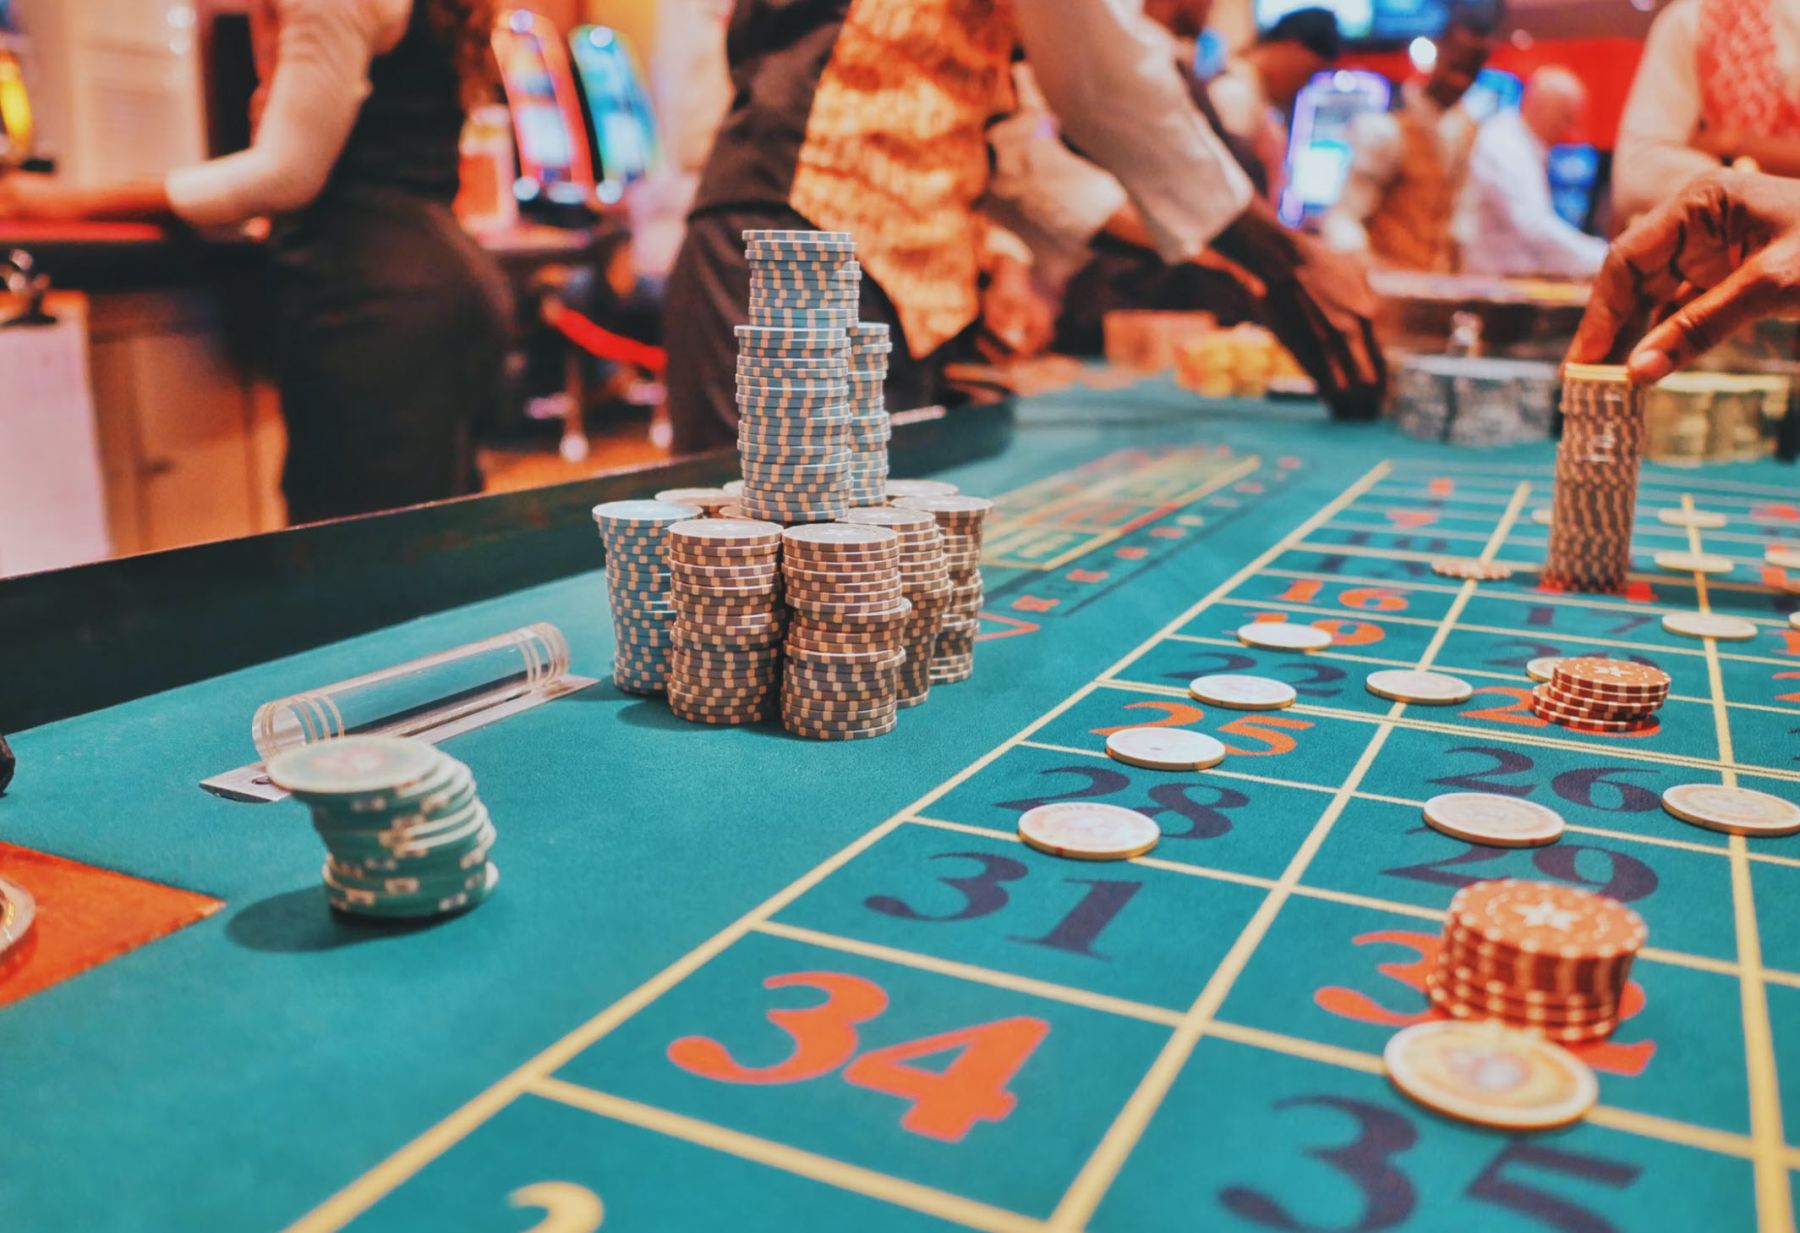 Thinking About cryptocurrency casino? 10 Reasons Why It's Time To Stop!